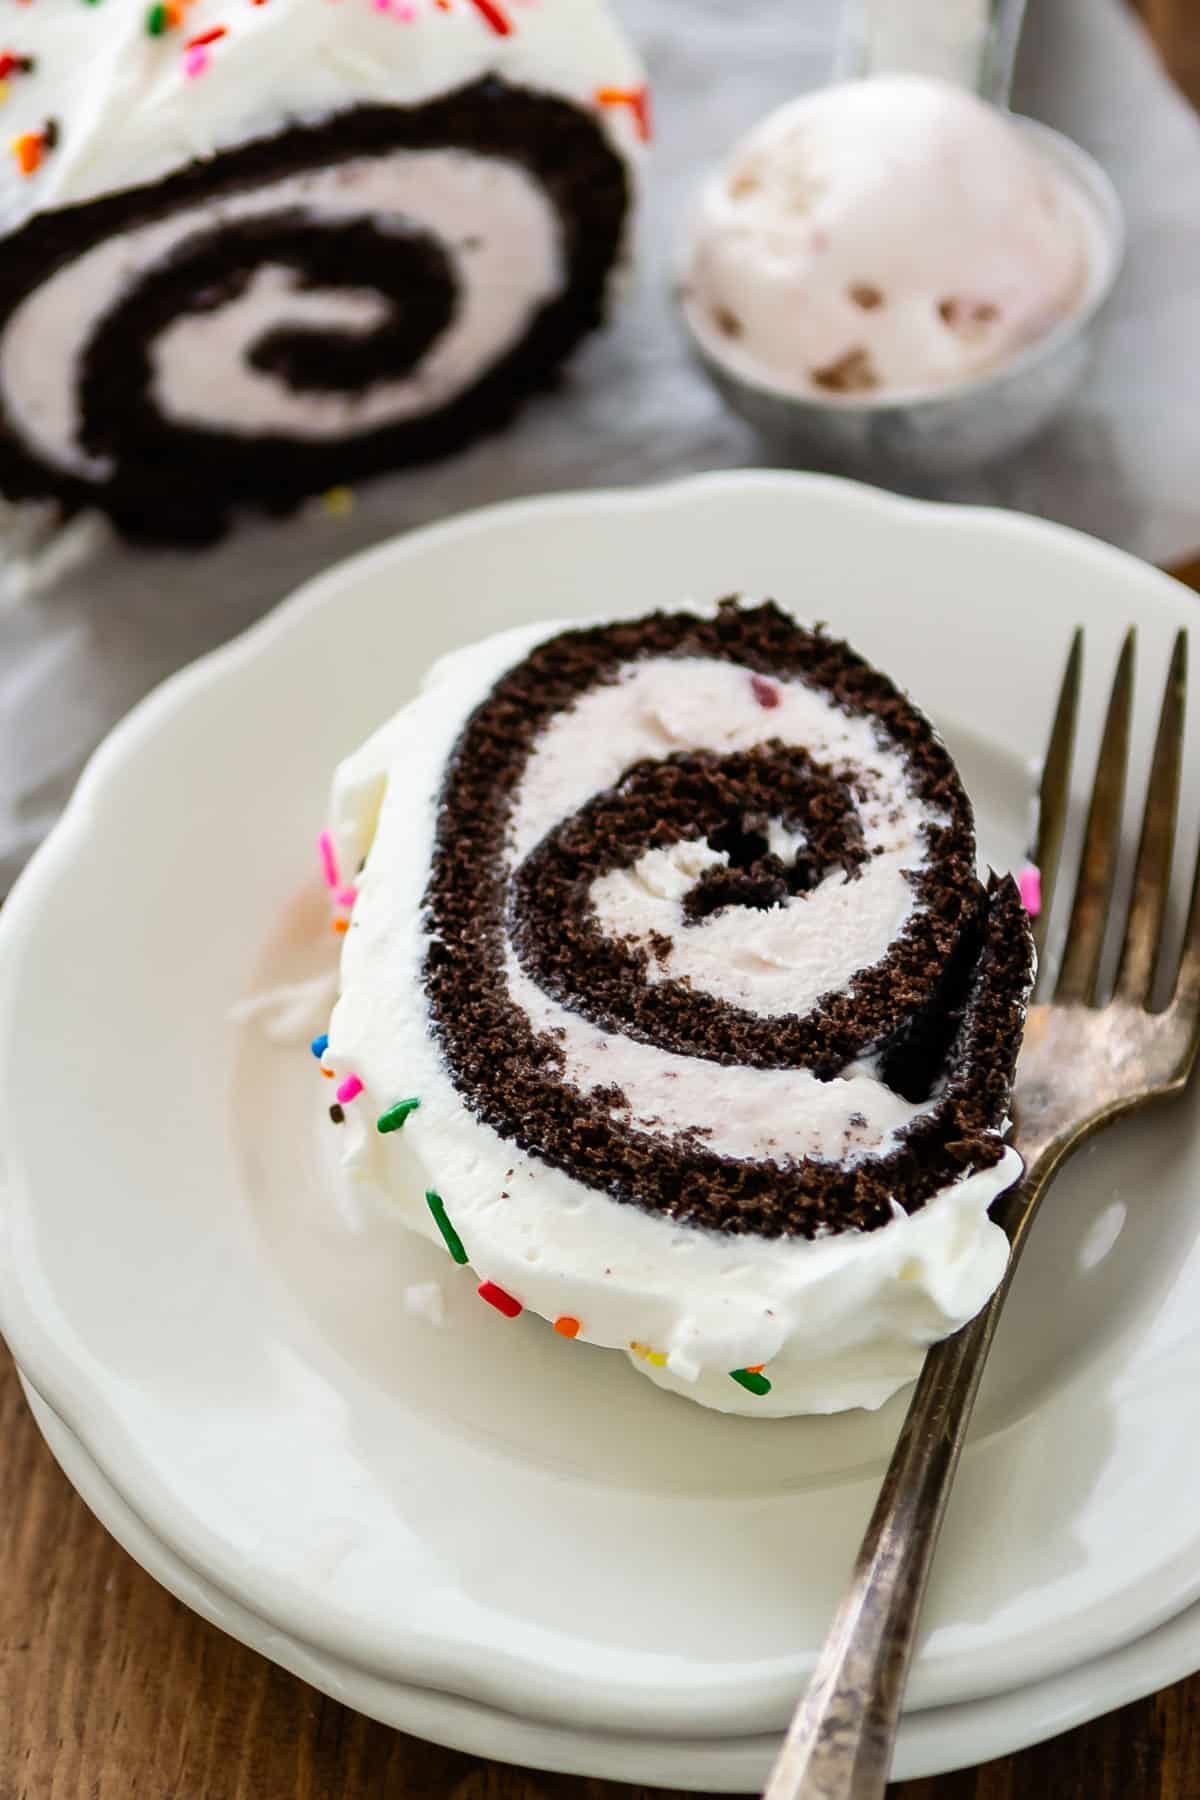 chocolate cake roll covered in white frosting and colorful sprinkles.